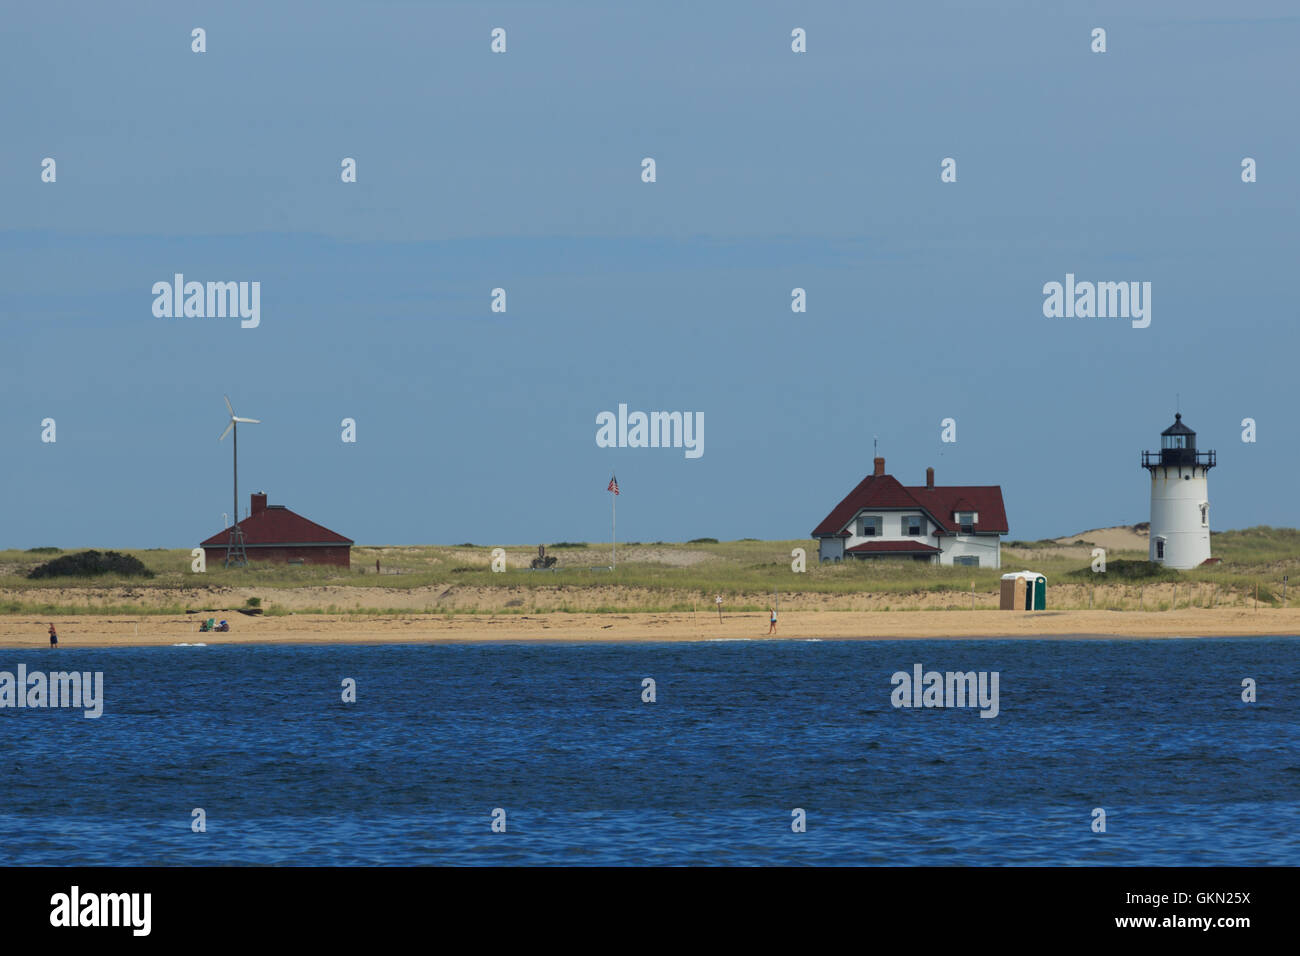 A photograph of Race Point Light Station in Provincetown, Massachusetts. Stock Photo